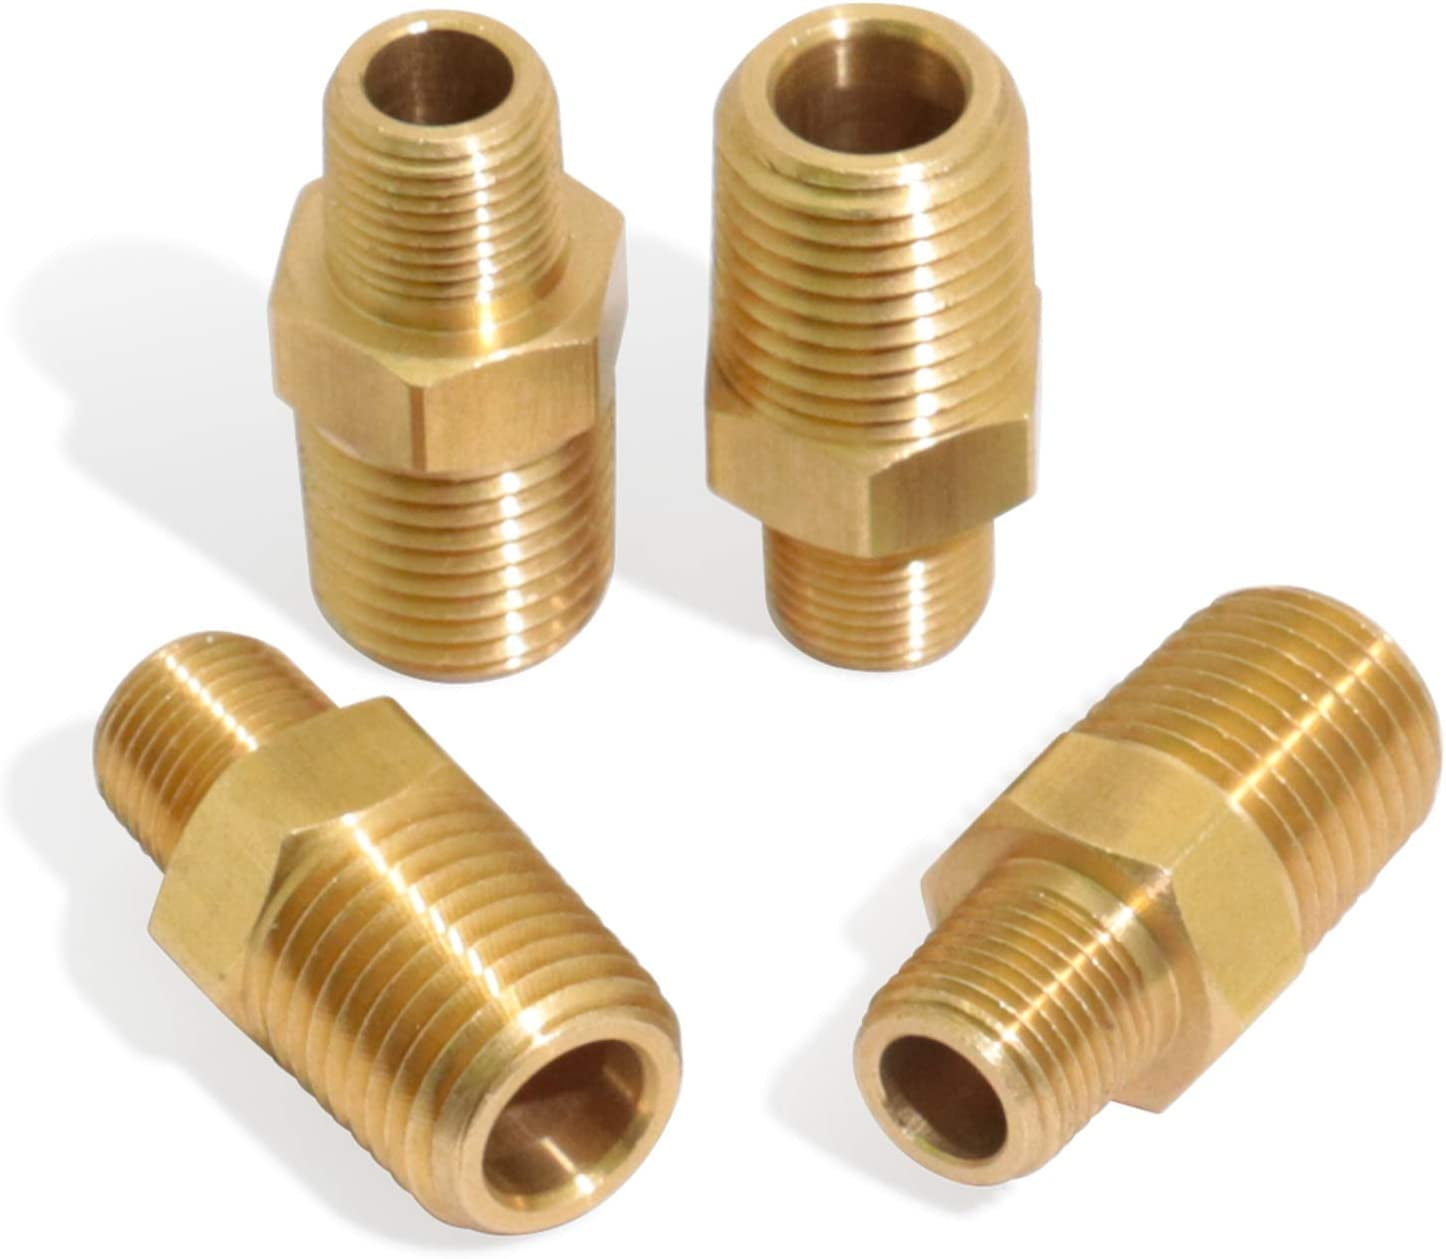 KOOTANS, KOOTANS NPT Standard 4Pcs 1/8" Male to 1/4" Male Pipe Adapter Brass Pipe Fitting, Hex Nipple Fast Coupler Fitting